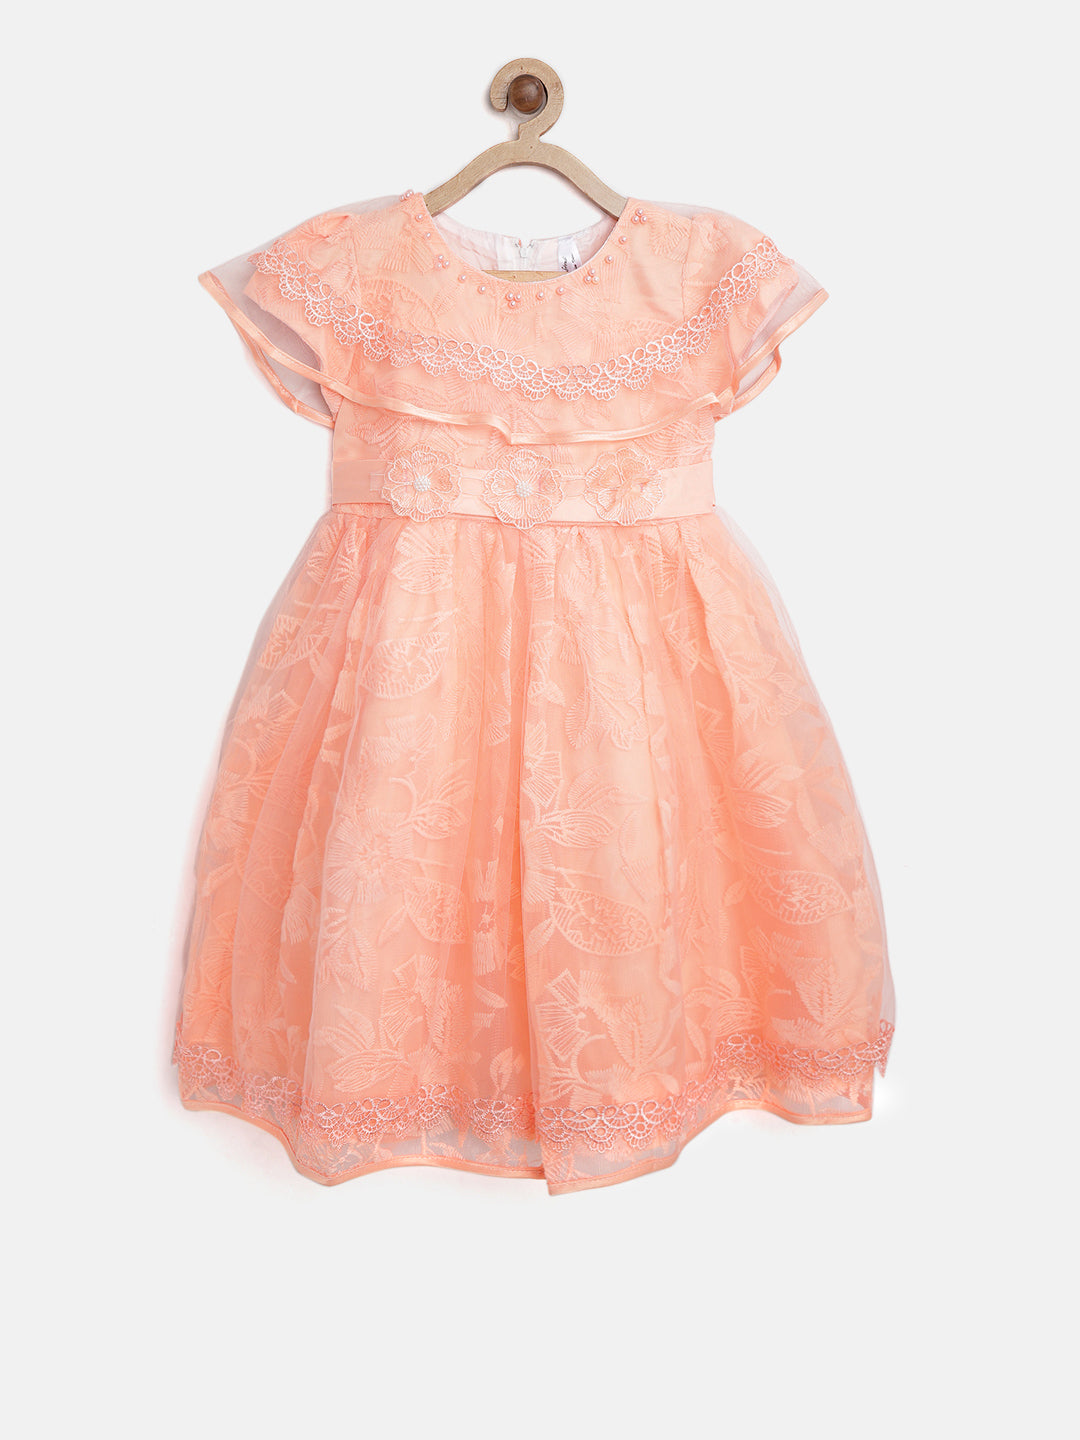 Gilr's Berry Pink Embroidered And Embellished Floral Party Dress - StyleStone Kid